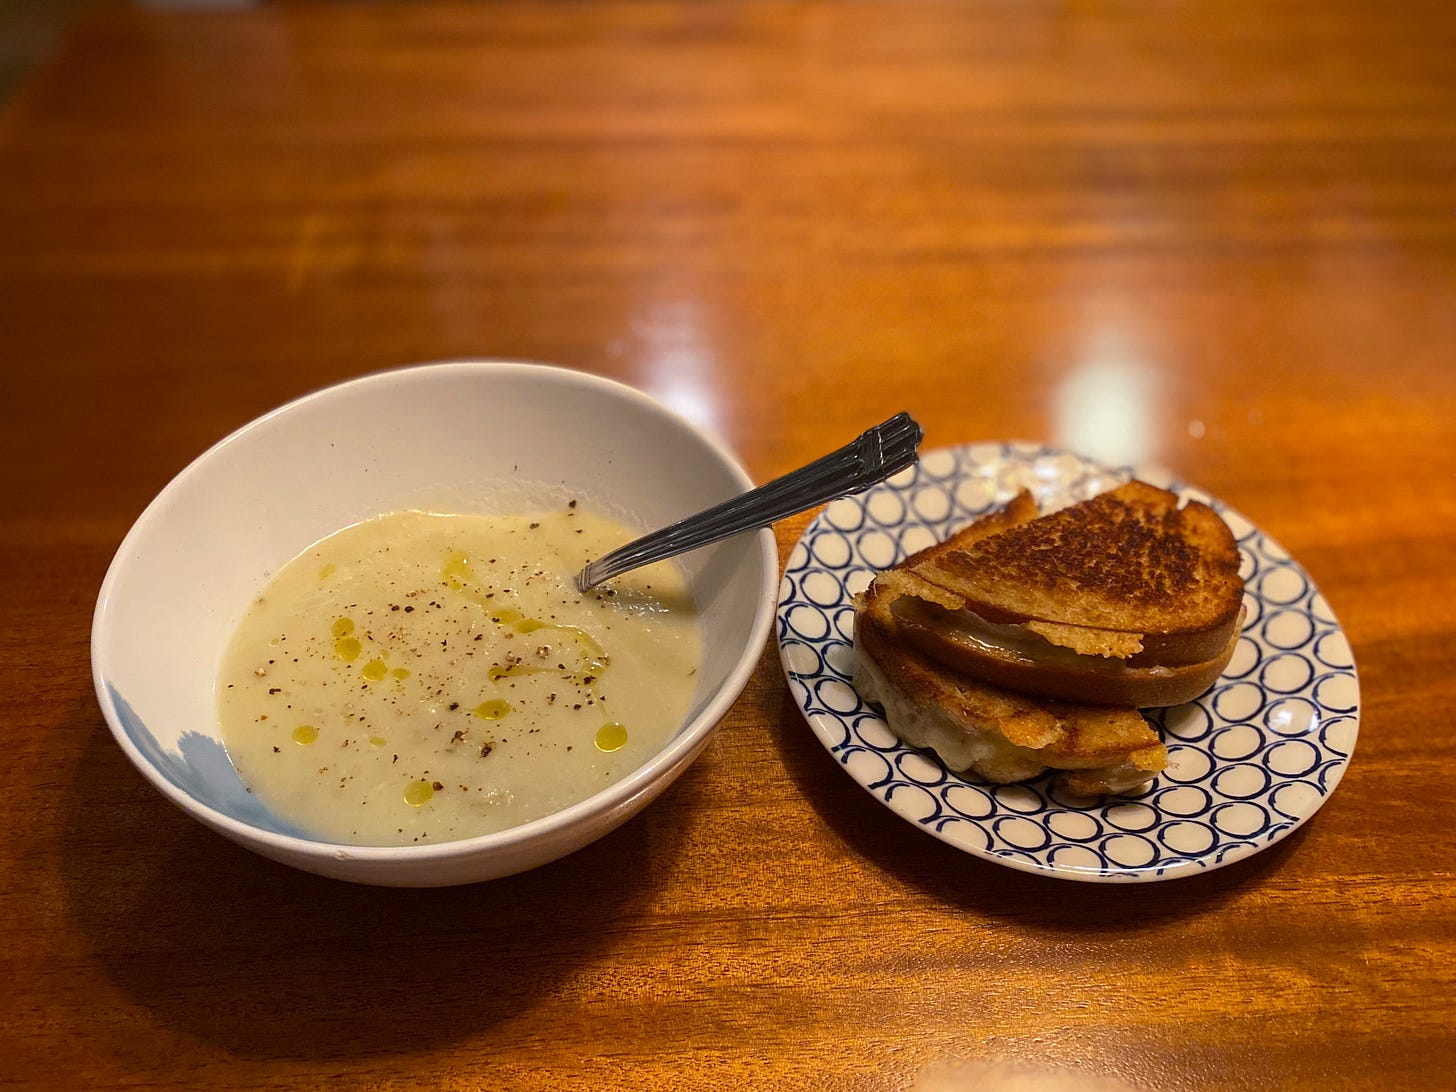 A white and blue bowl of potato-leek soup, sprinkled with pepper and drizzled with olive oil, next to a white and blue side plate with a grilled cheese on it. The sandwich is cut in half with melted cheese coming out the edges, burned and crisped in places where it's touched the pan.